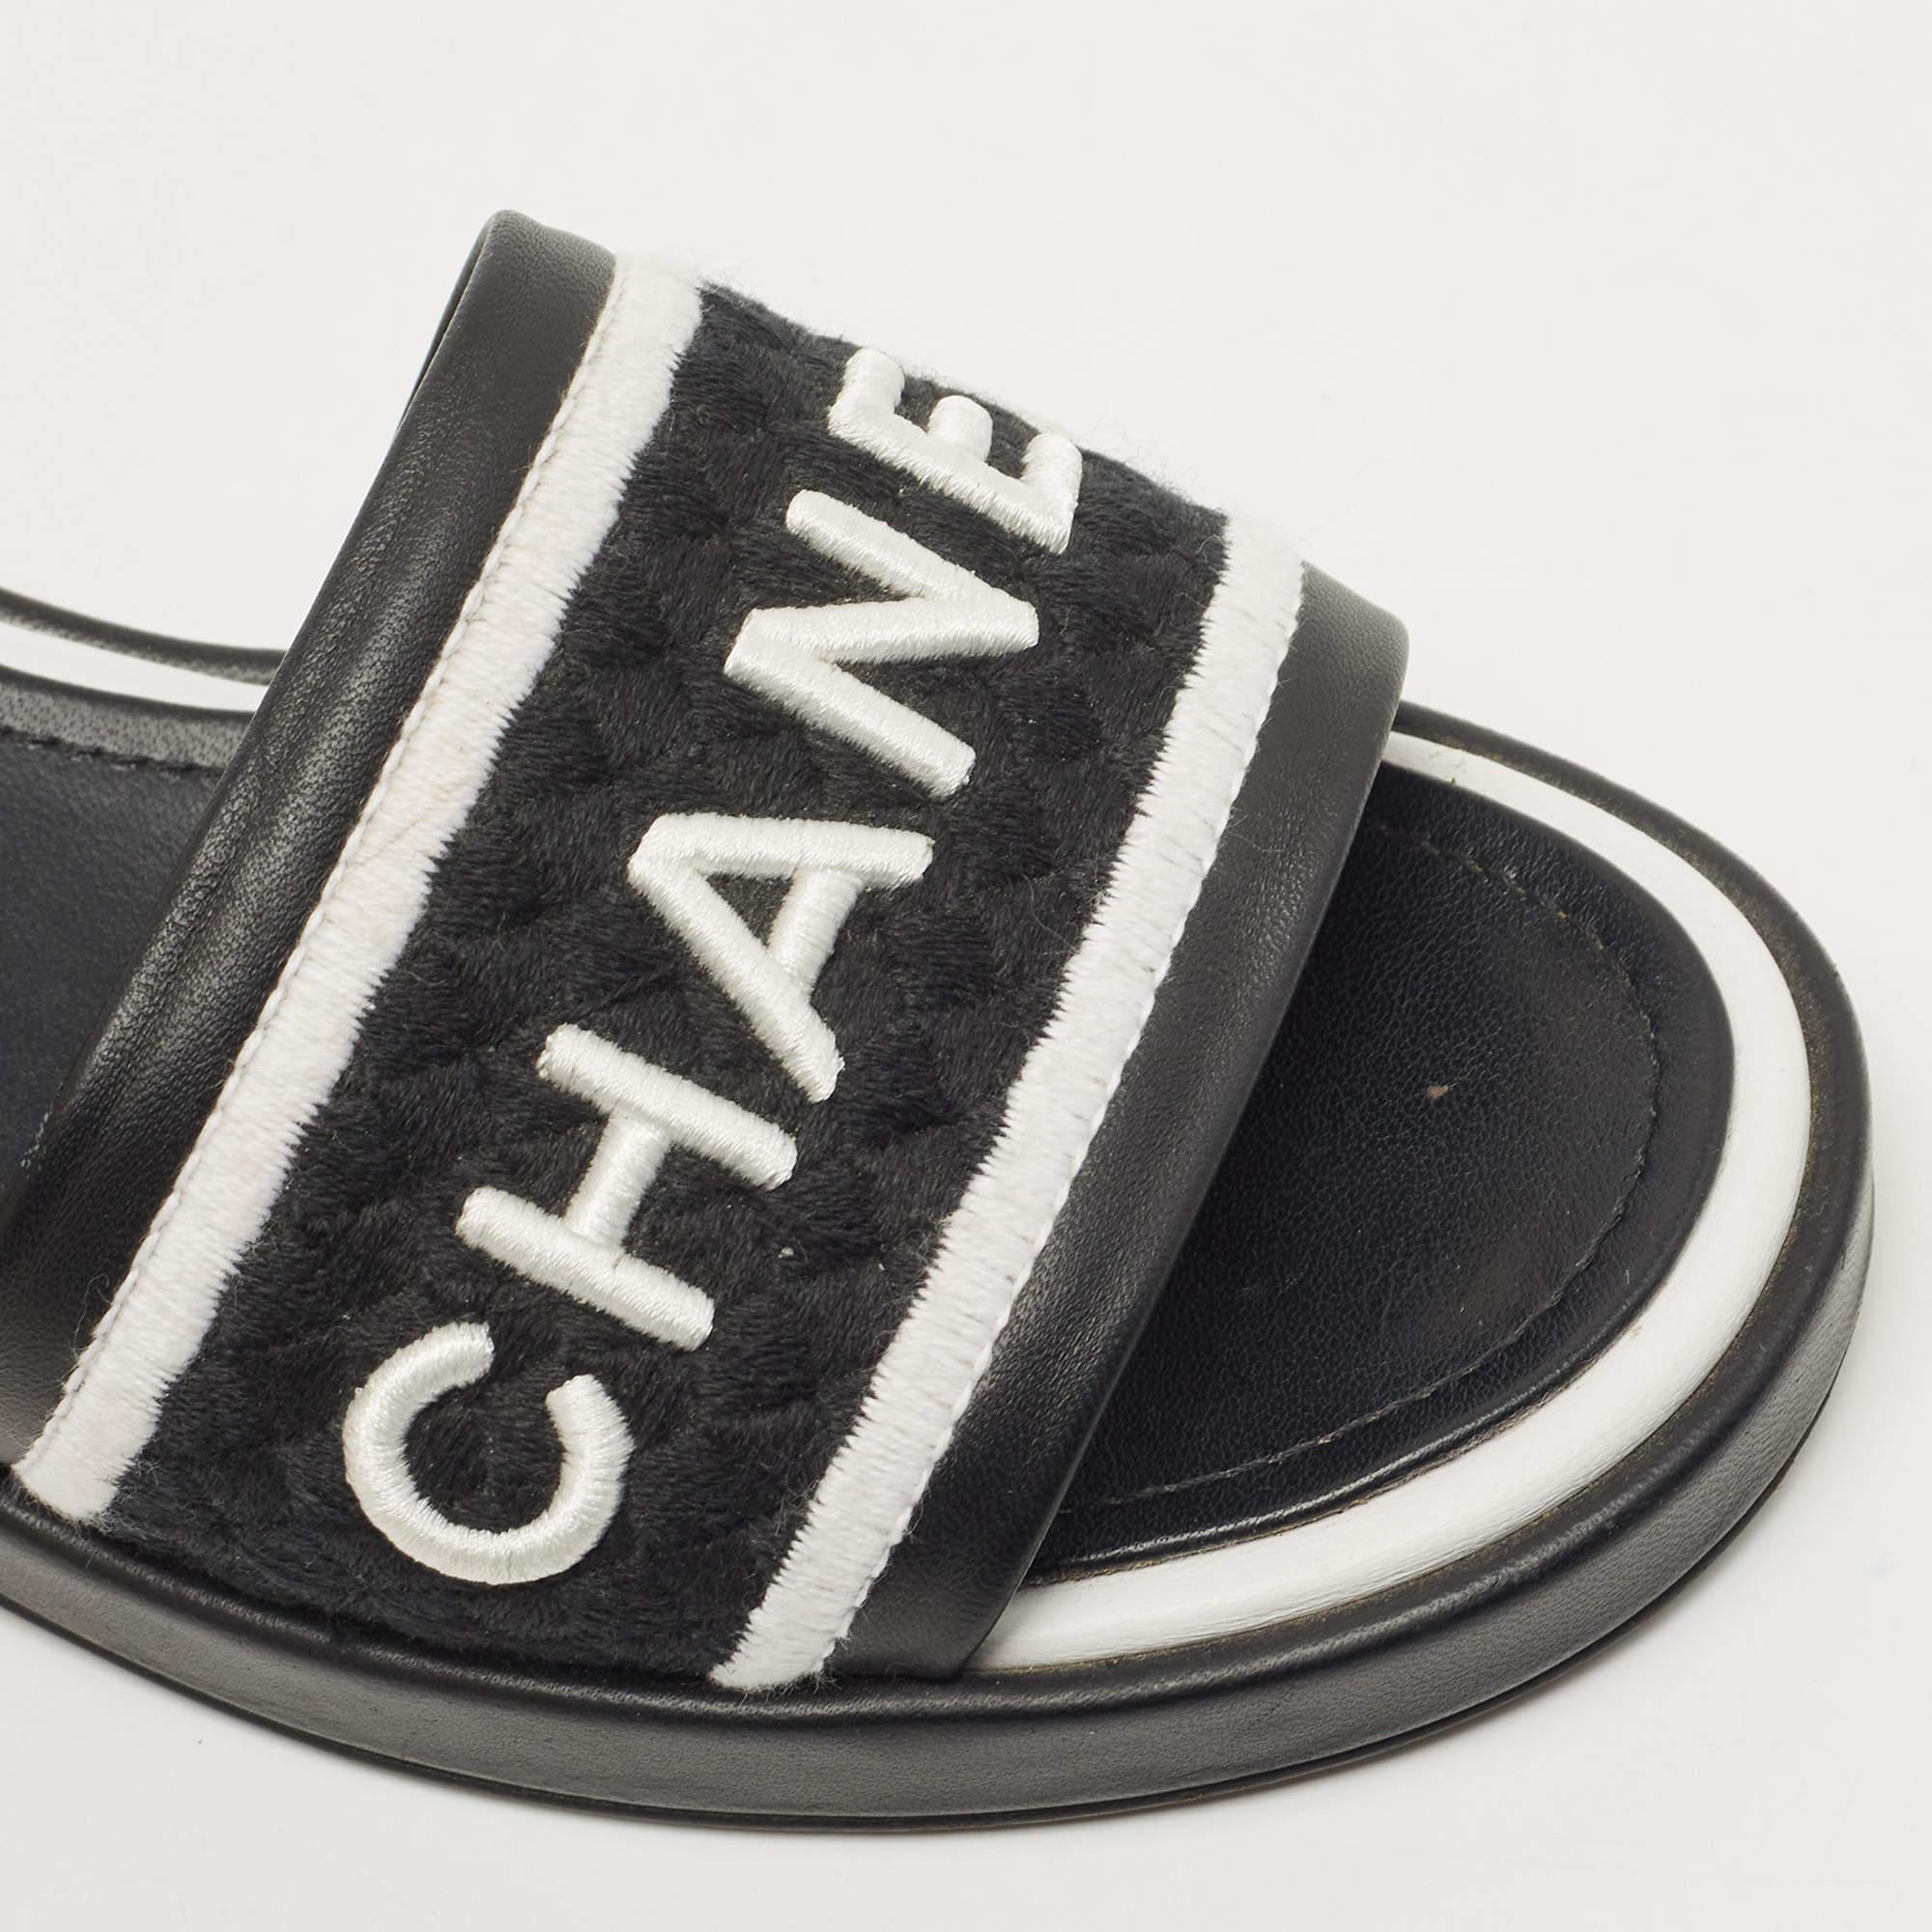 Chanel White/Black Leather and Canvas CC Logo Flat Slides Size 39 2